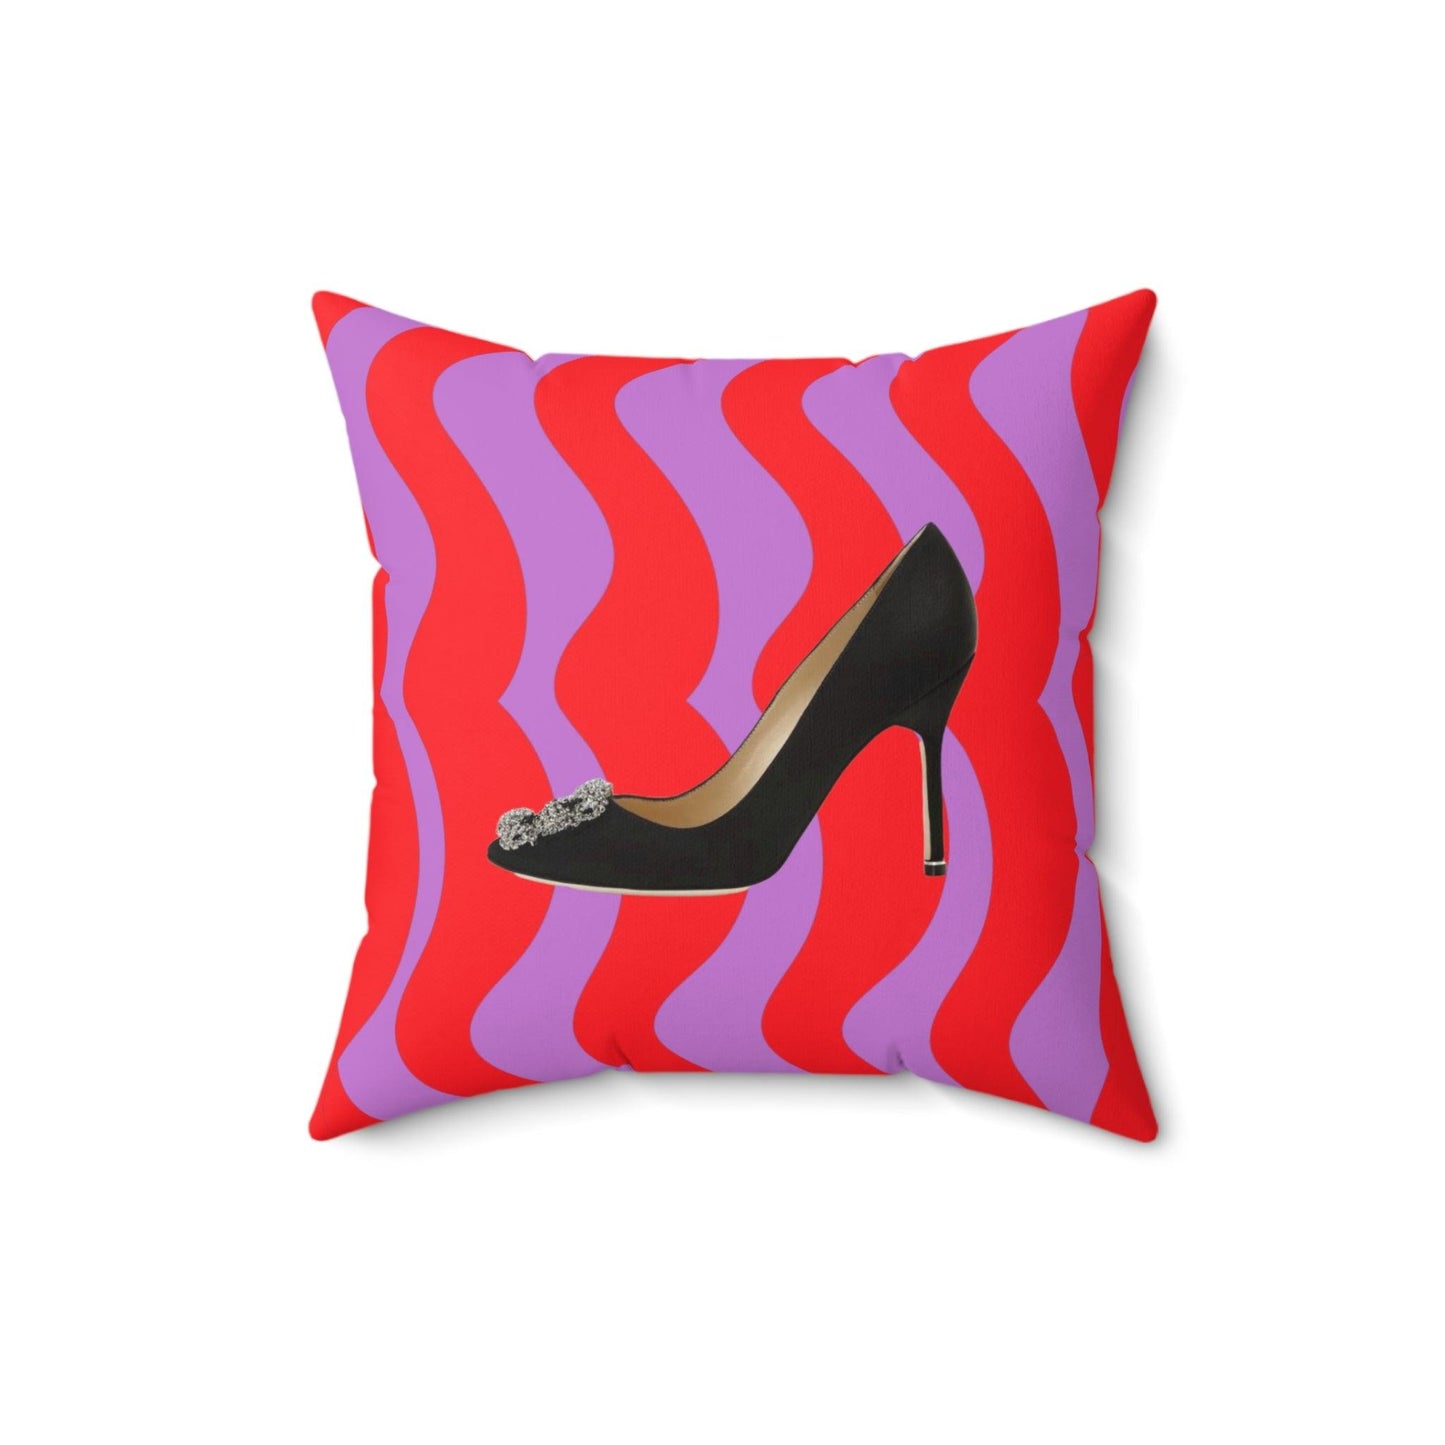 Monalo Heels Pop Inspired Accent Throw Pillow - MAIA HOMES